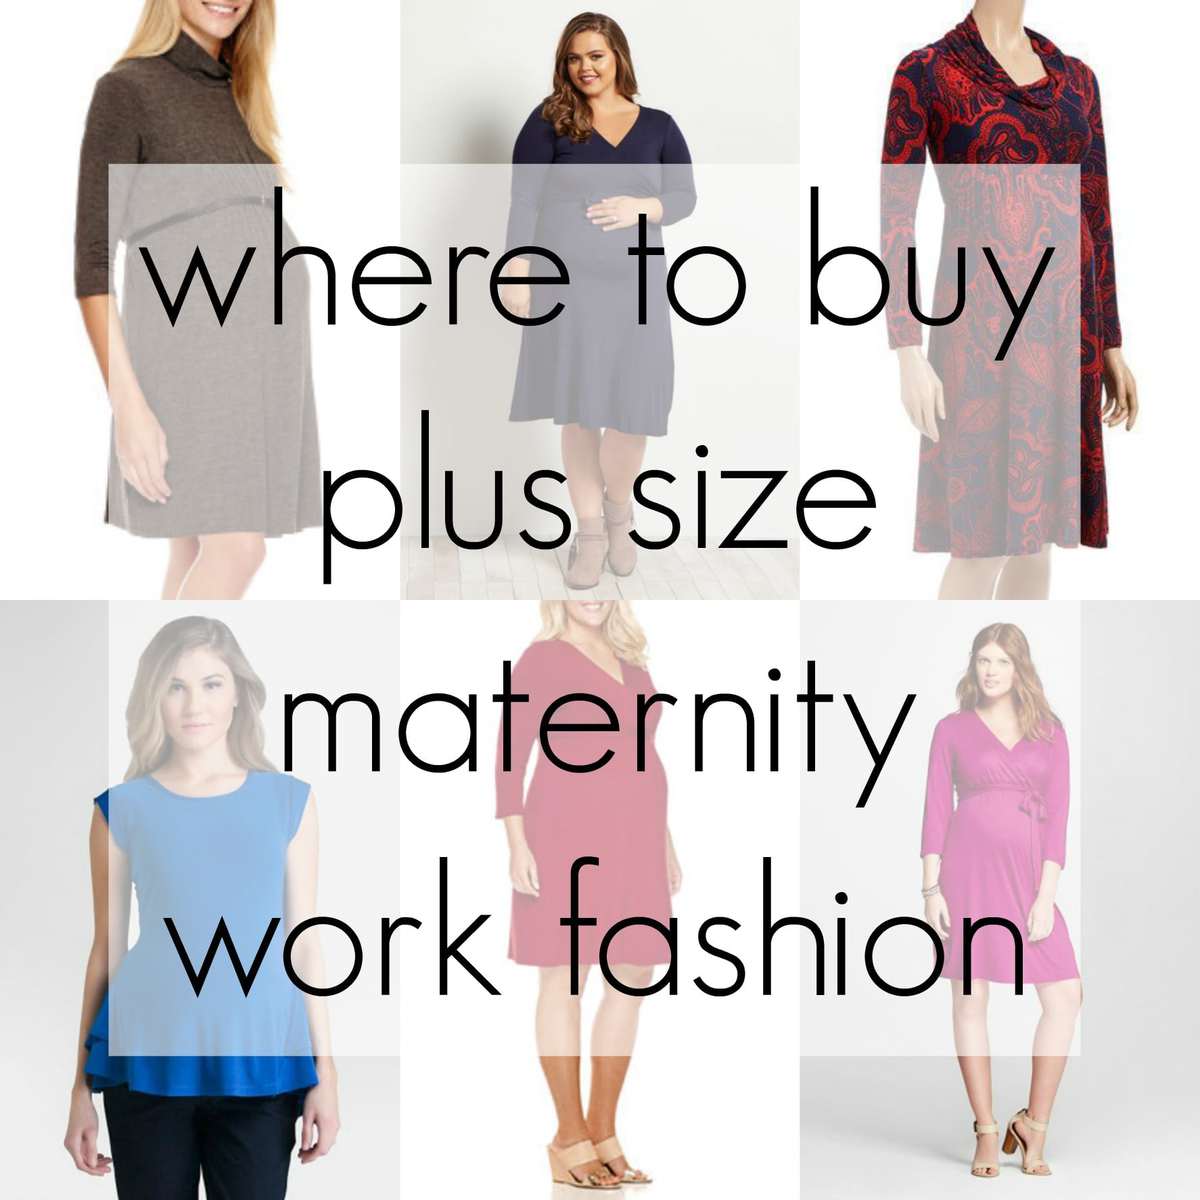 Where to Buy Plus Size Maternity Work Clothes | Wardrobe Oxygen